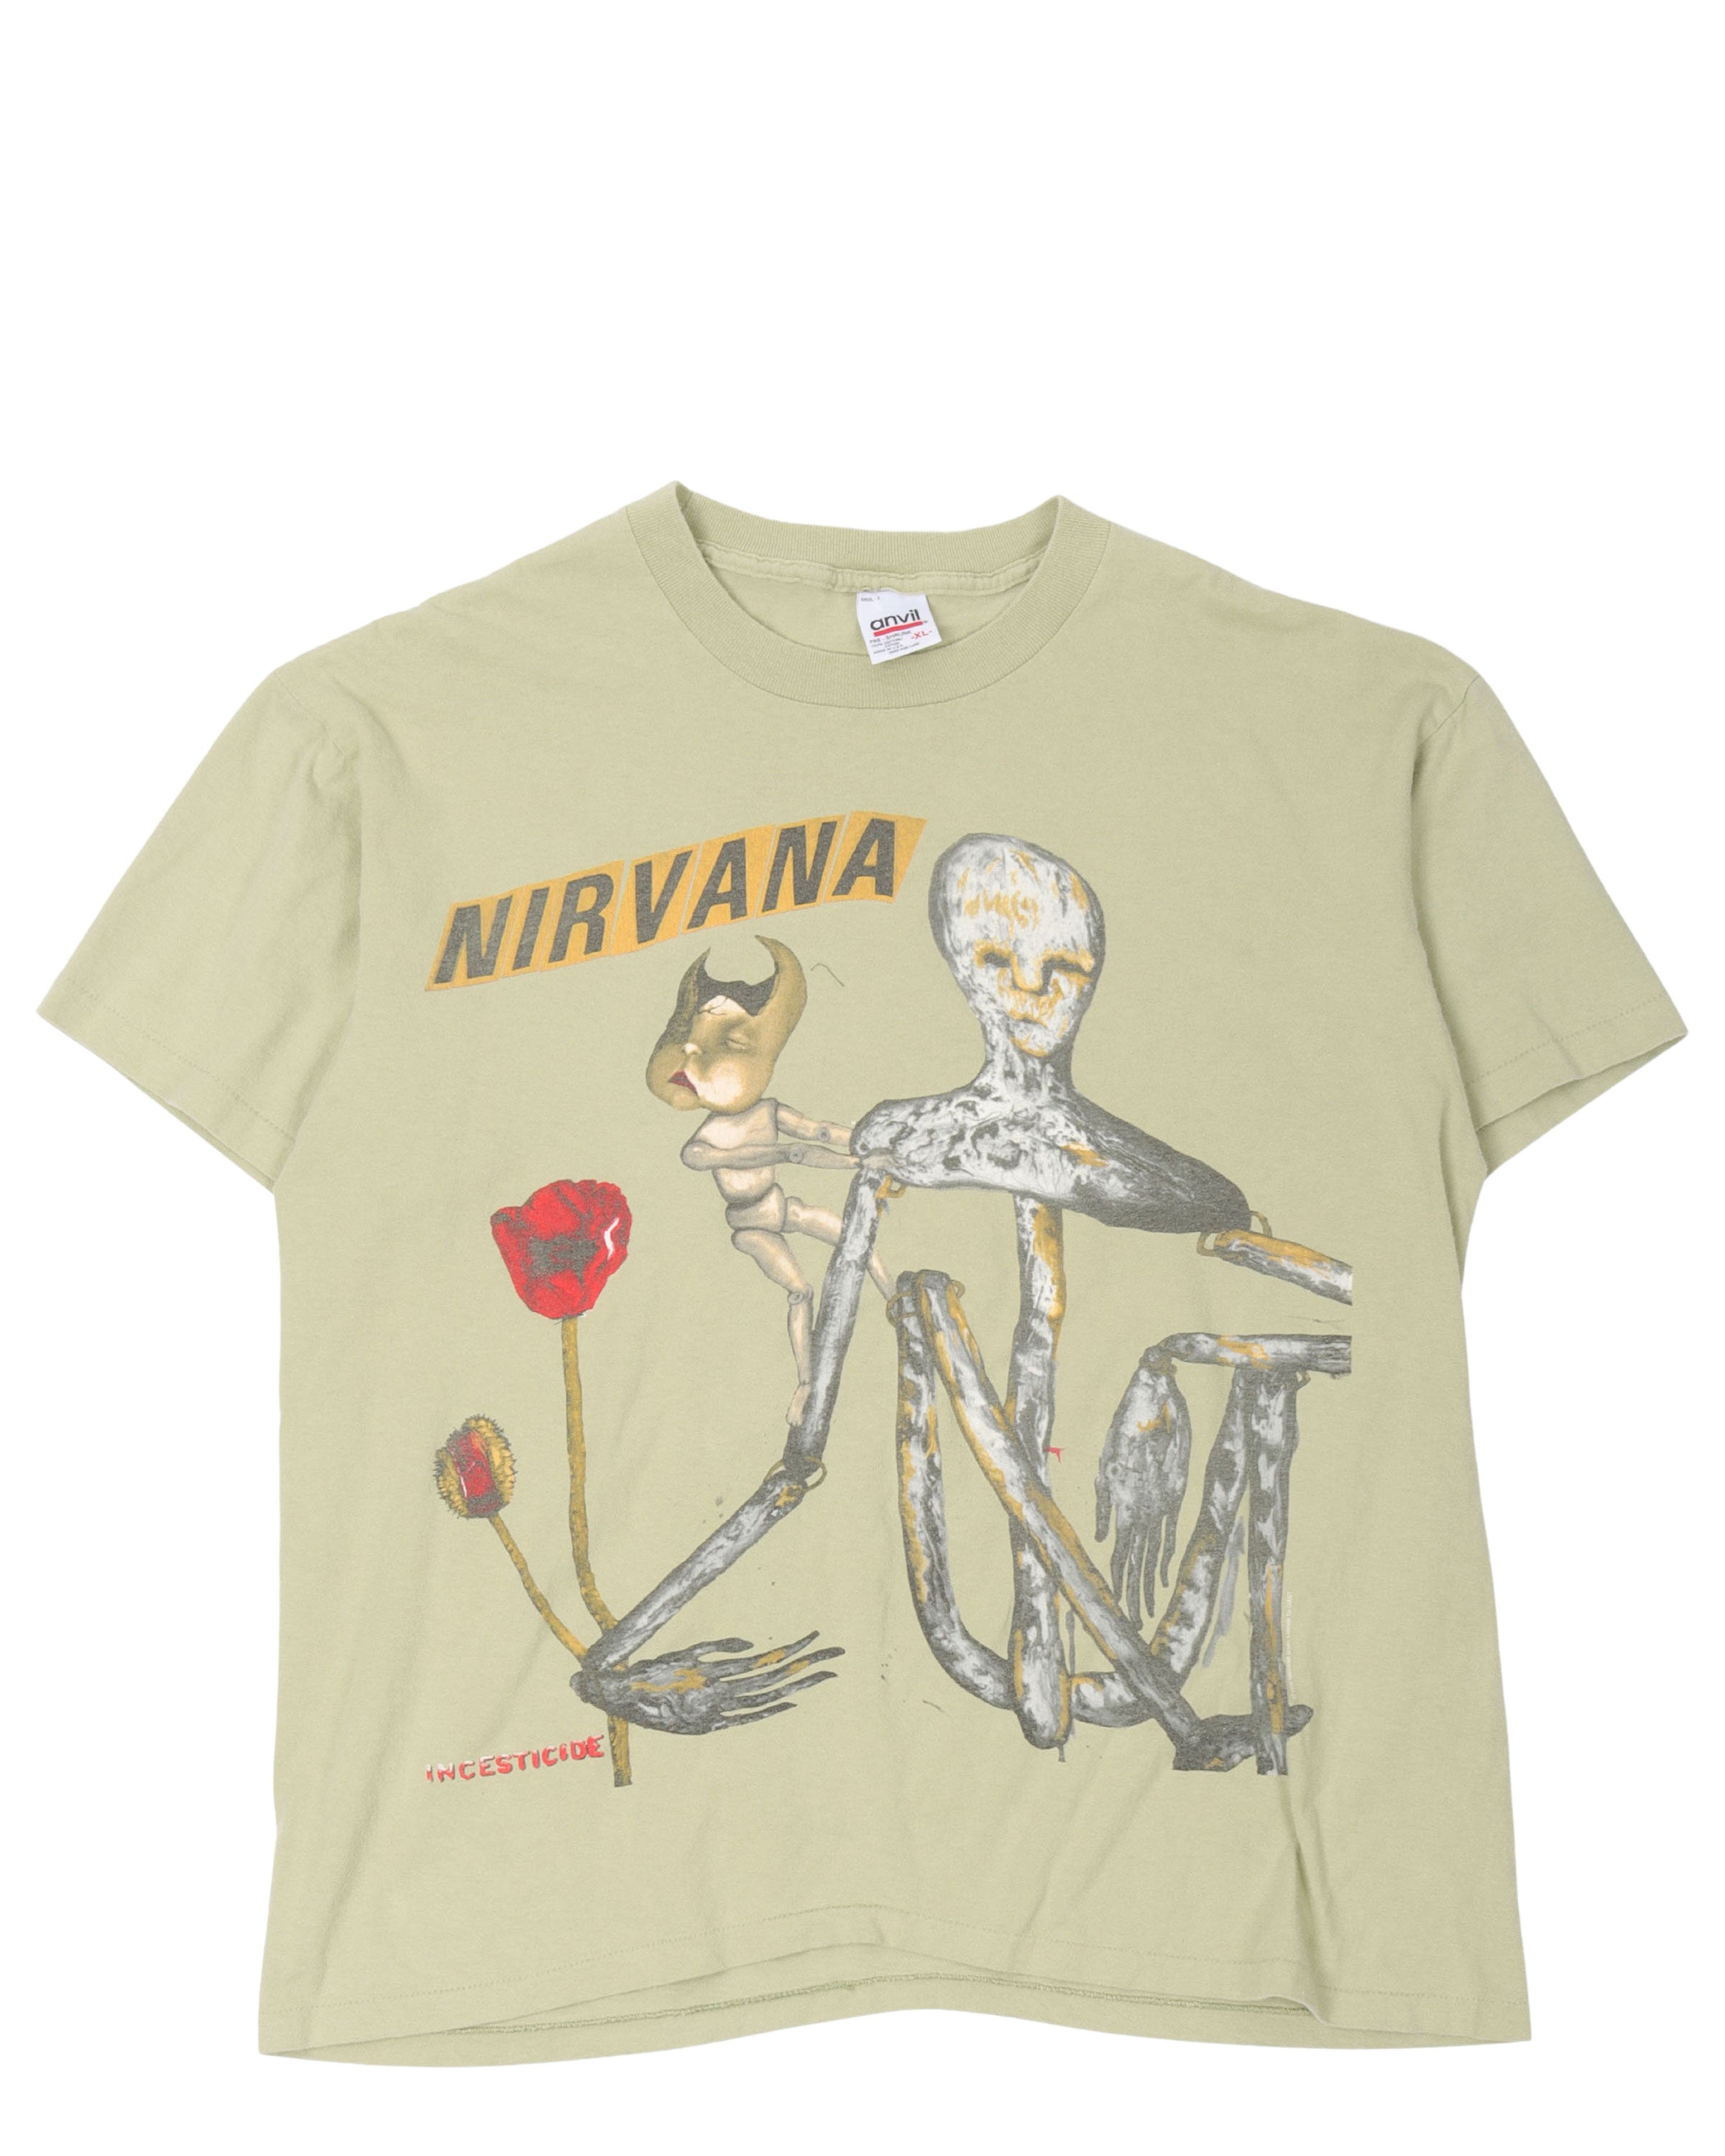 Nirvana Insecticide T-Shirt